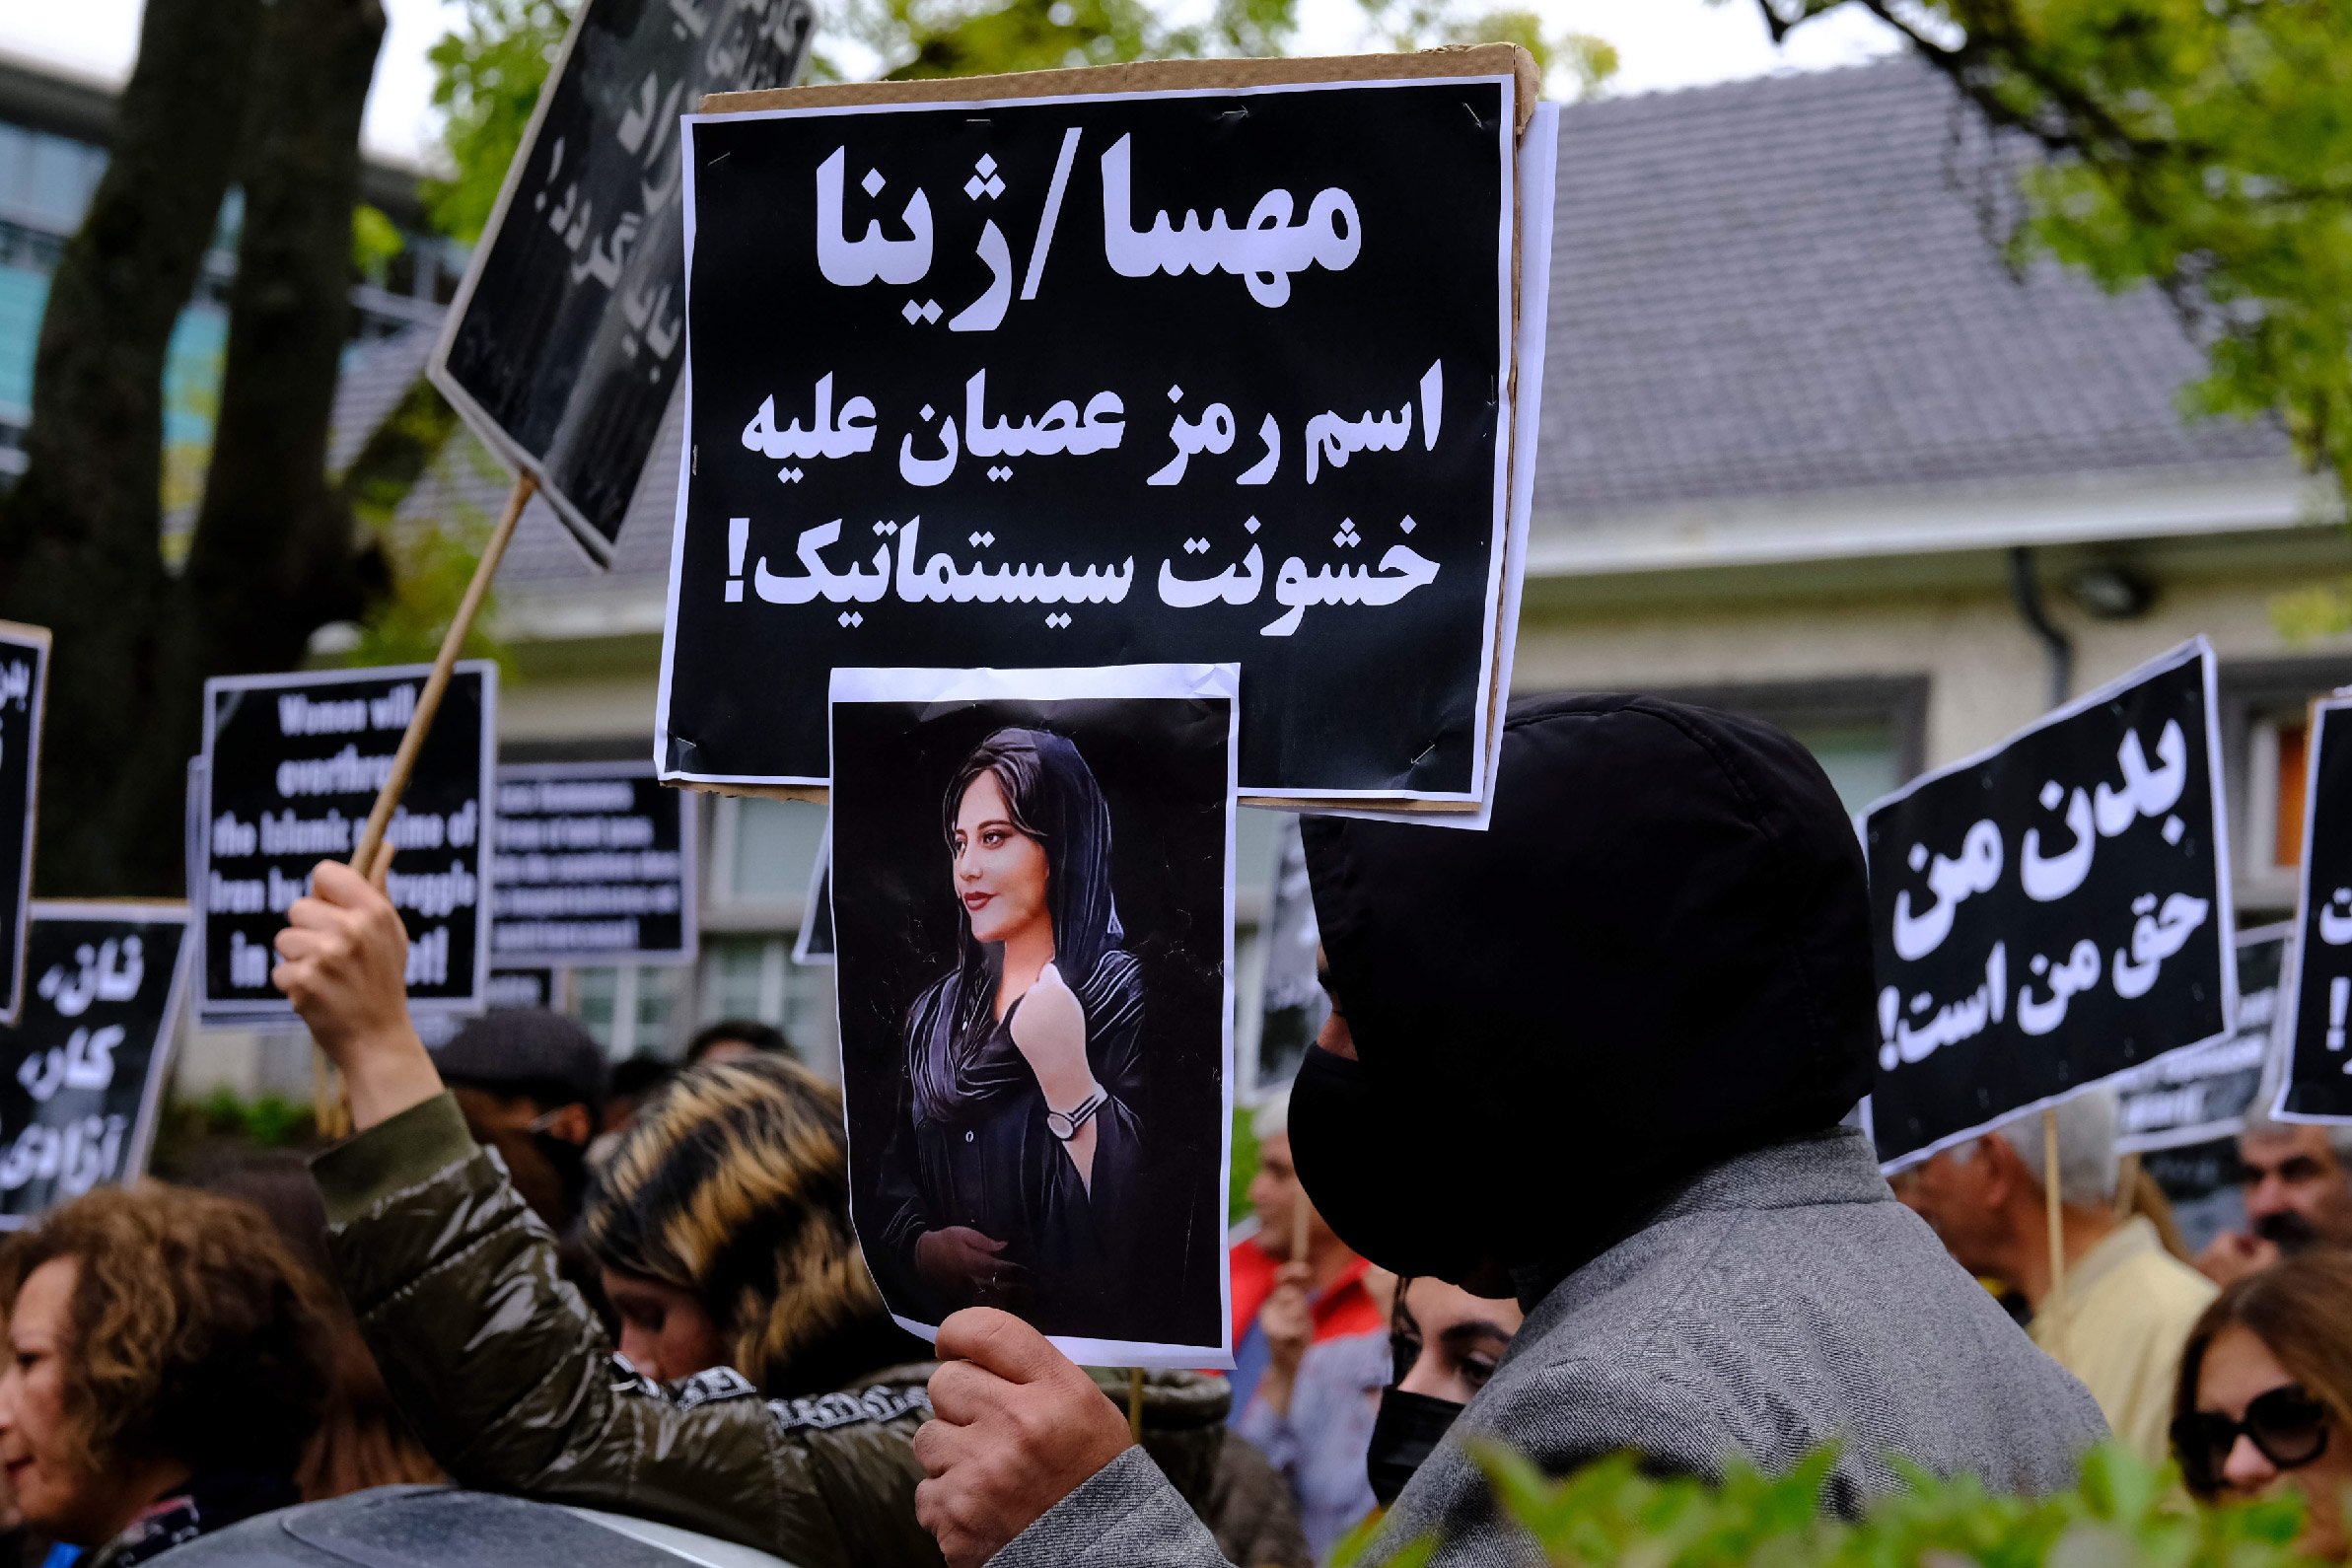 Protestors take part during a demonstration in front of the Iranian embassy in Brussels, Belgium, following the death of Mahsa Amini